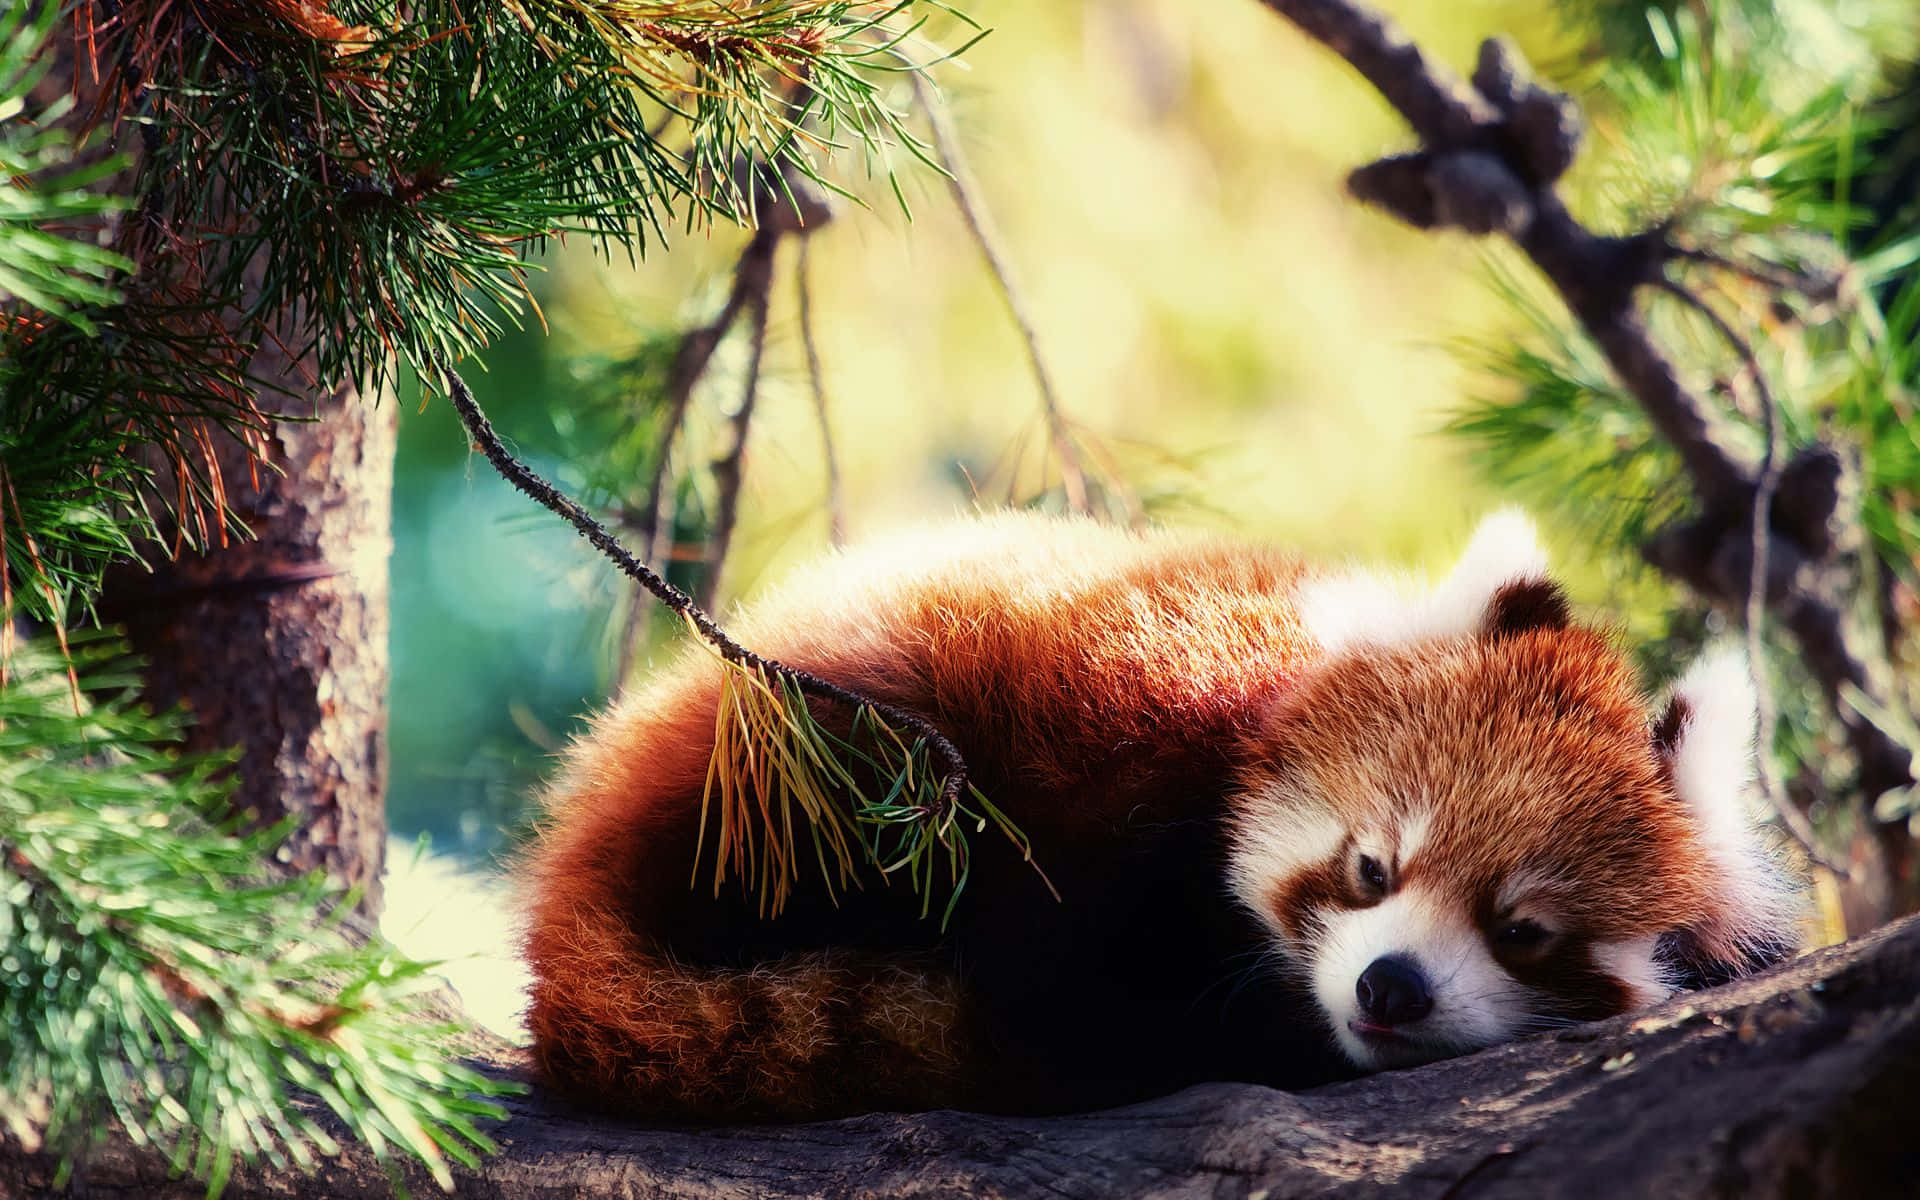 A playful Red Panda enjoying a snack in nature